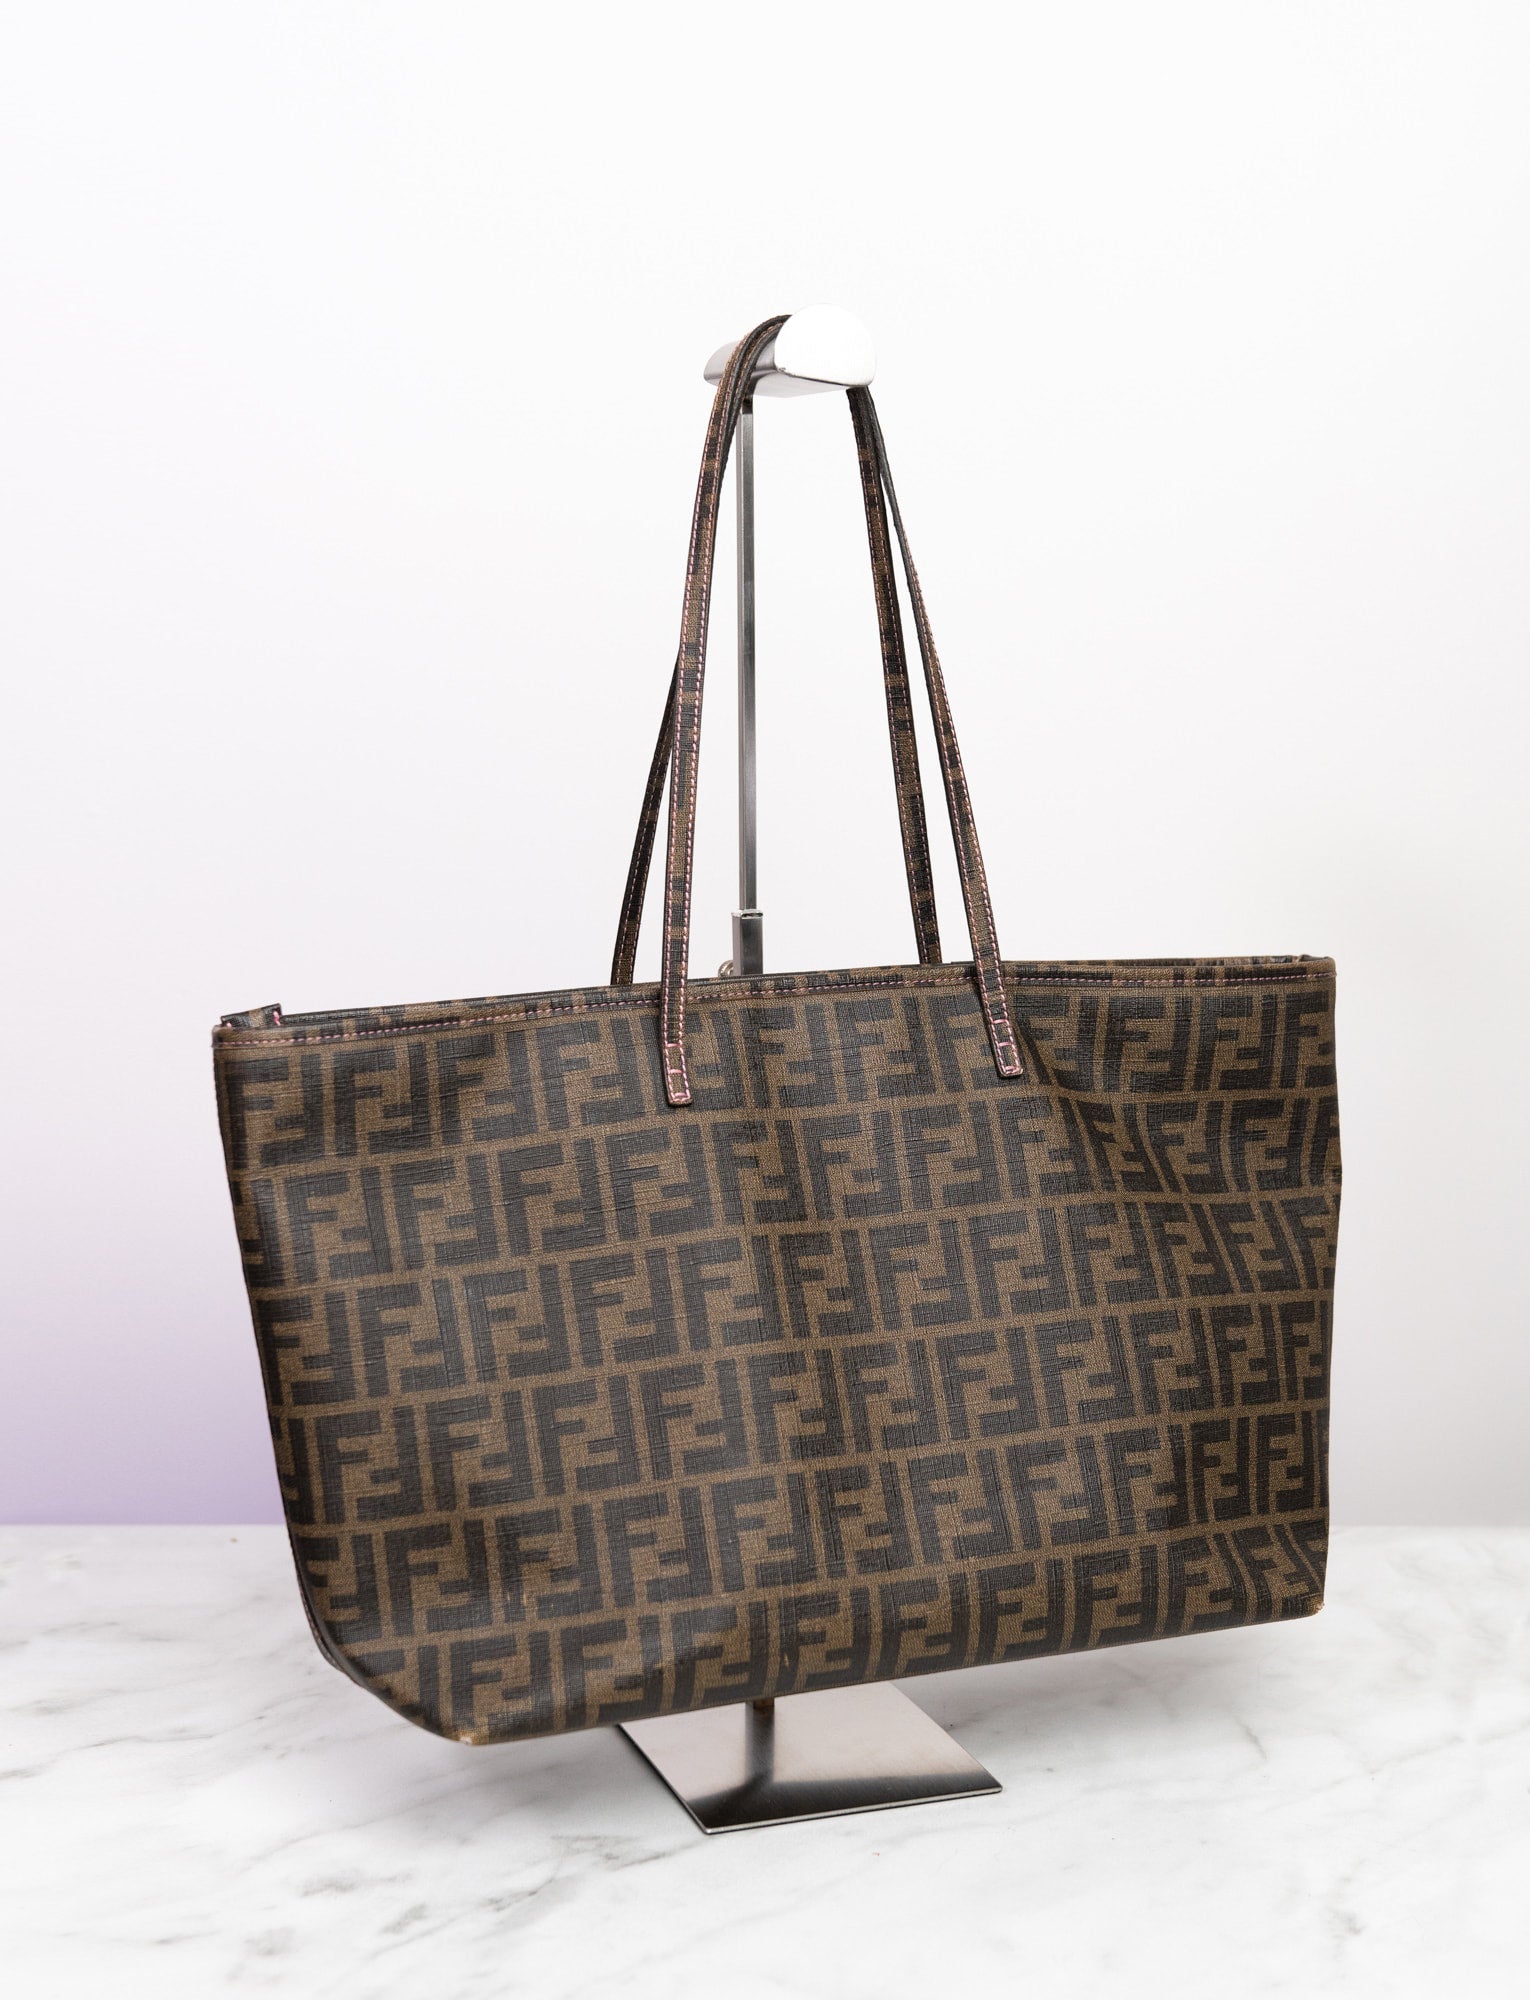 Fendi Roll tote Zucca Canvas and Leather Shoulder Bag